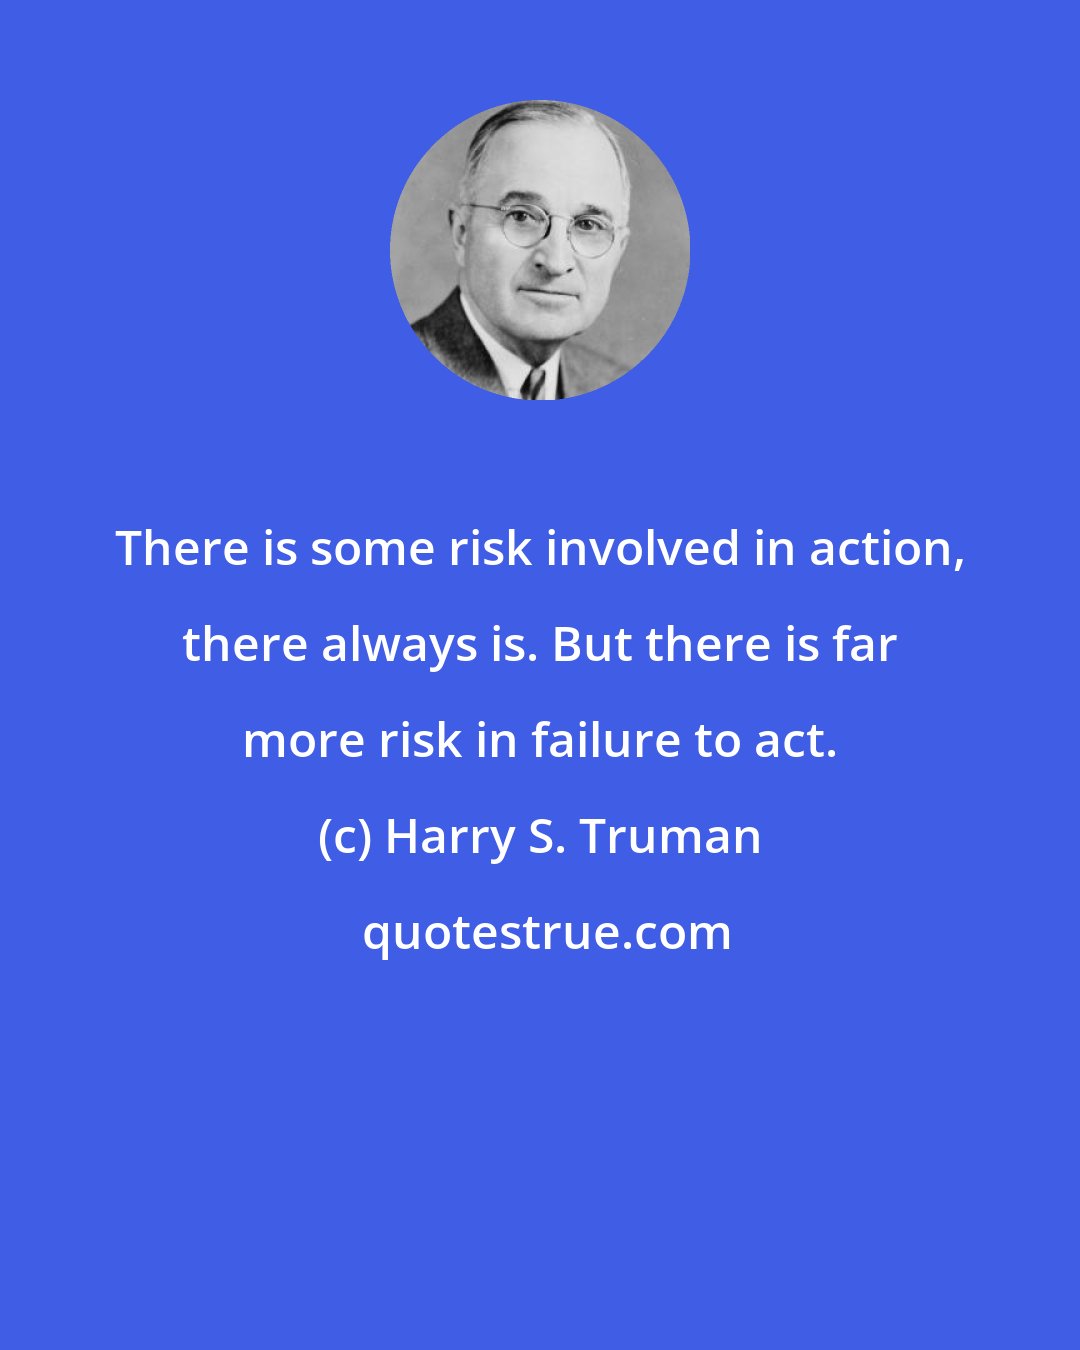 Harry S. Truman: There is some risk involved in action, there always is. But there is far more risk in failure to act.